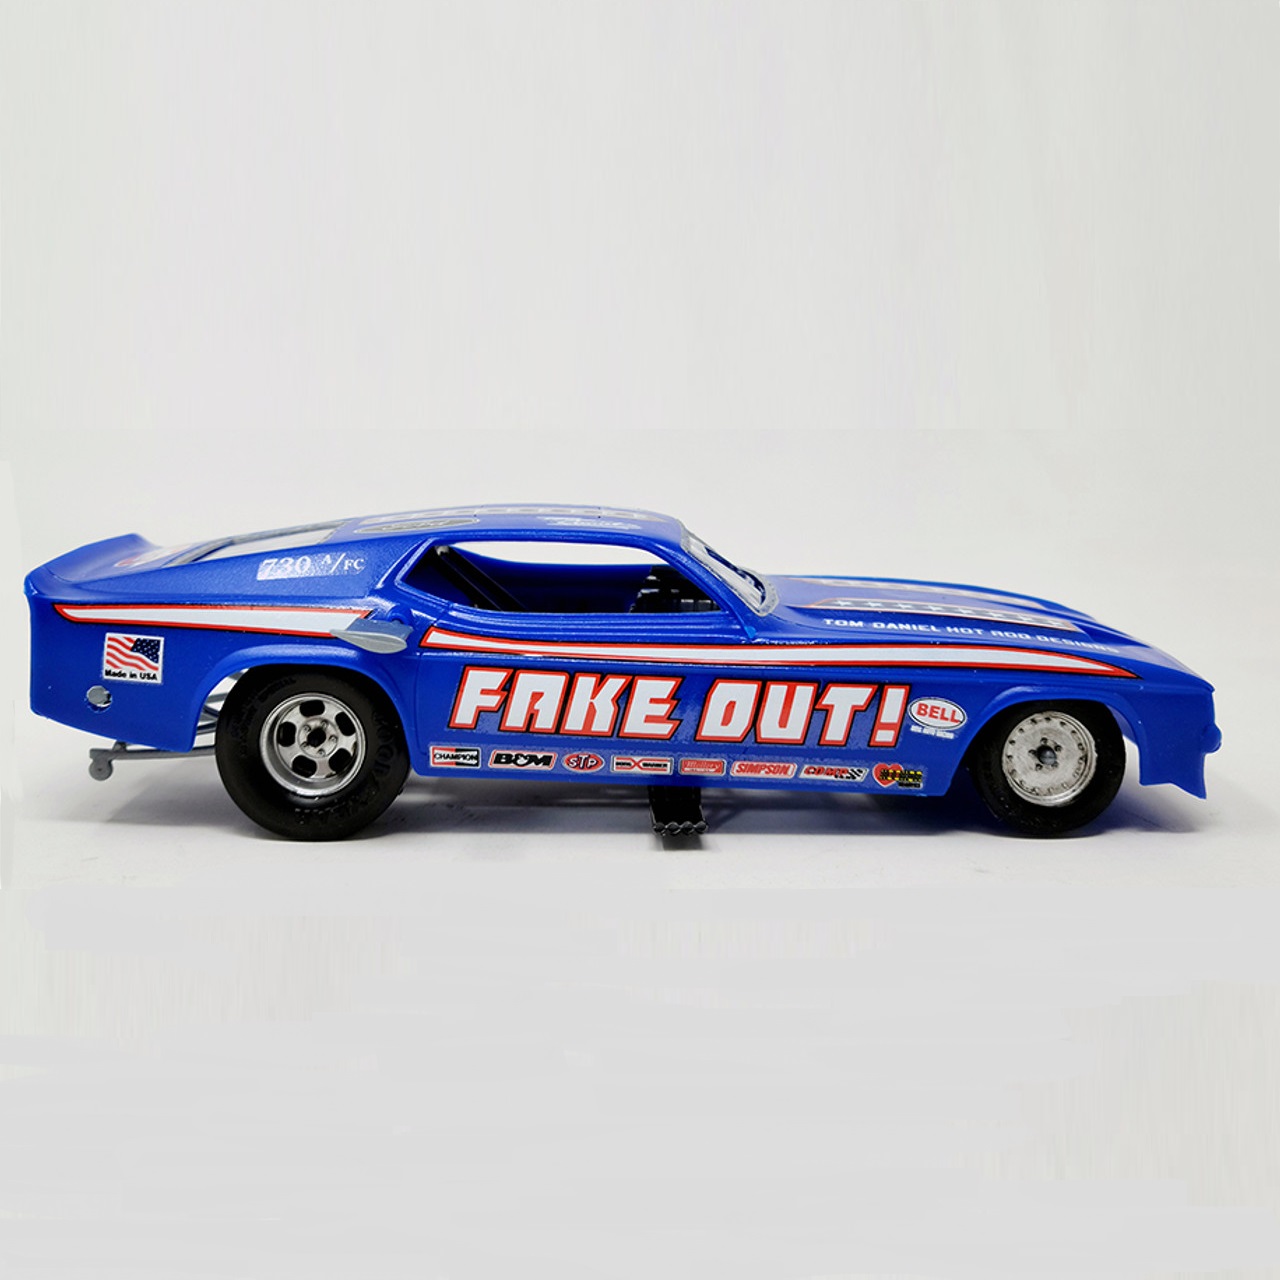 Fake Out Funny Car 2